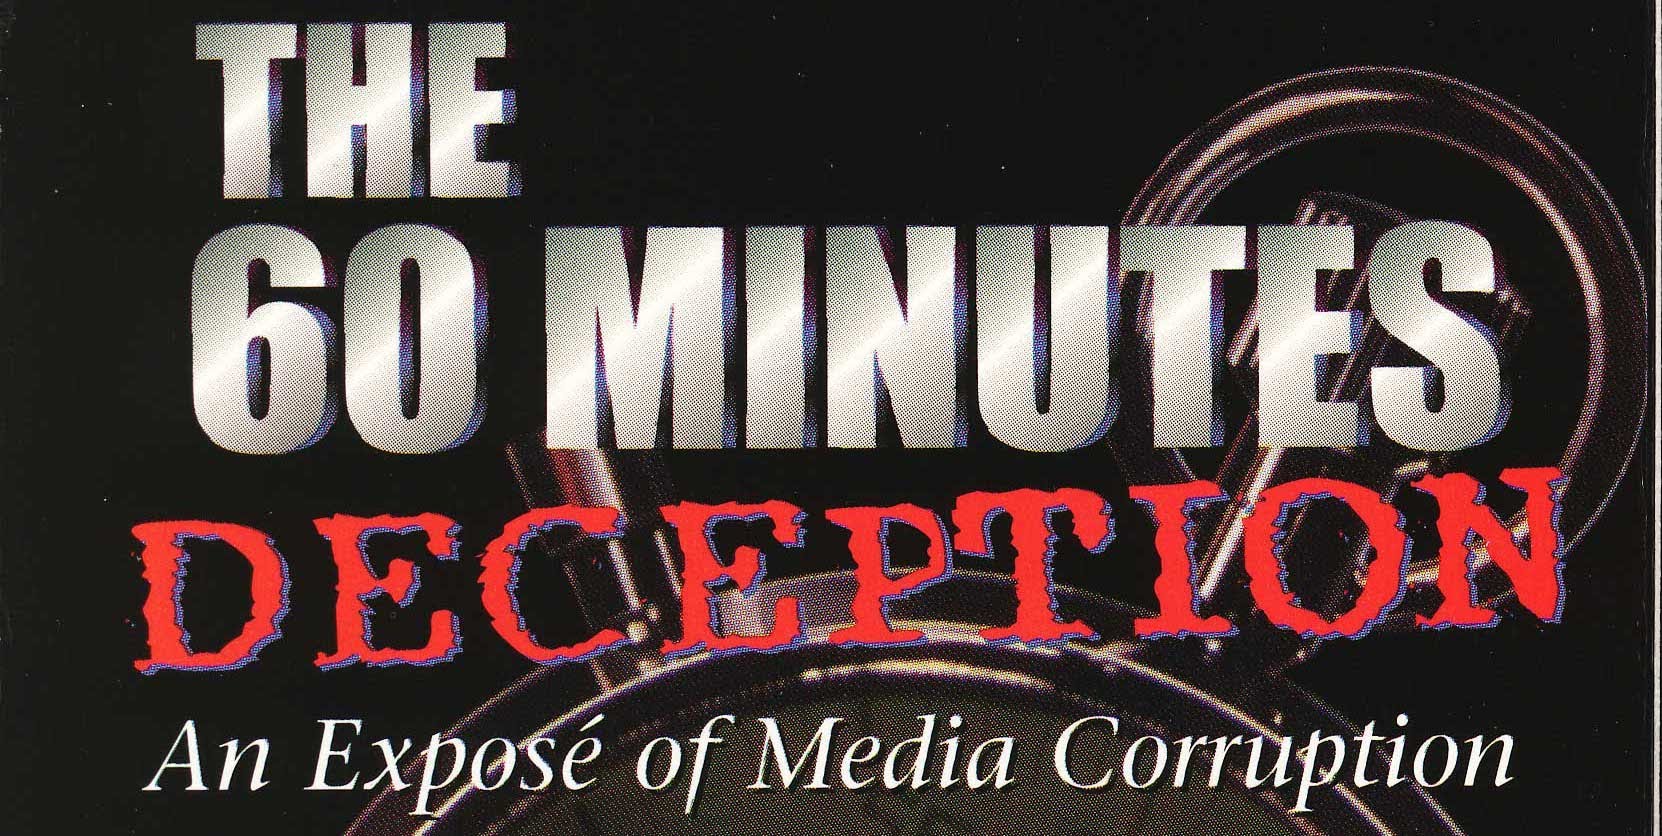 The 60 Minutes Deception (full length, official documentary) How Clinton affects the media